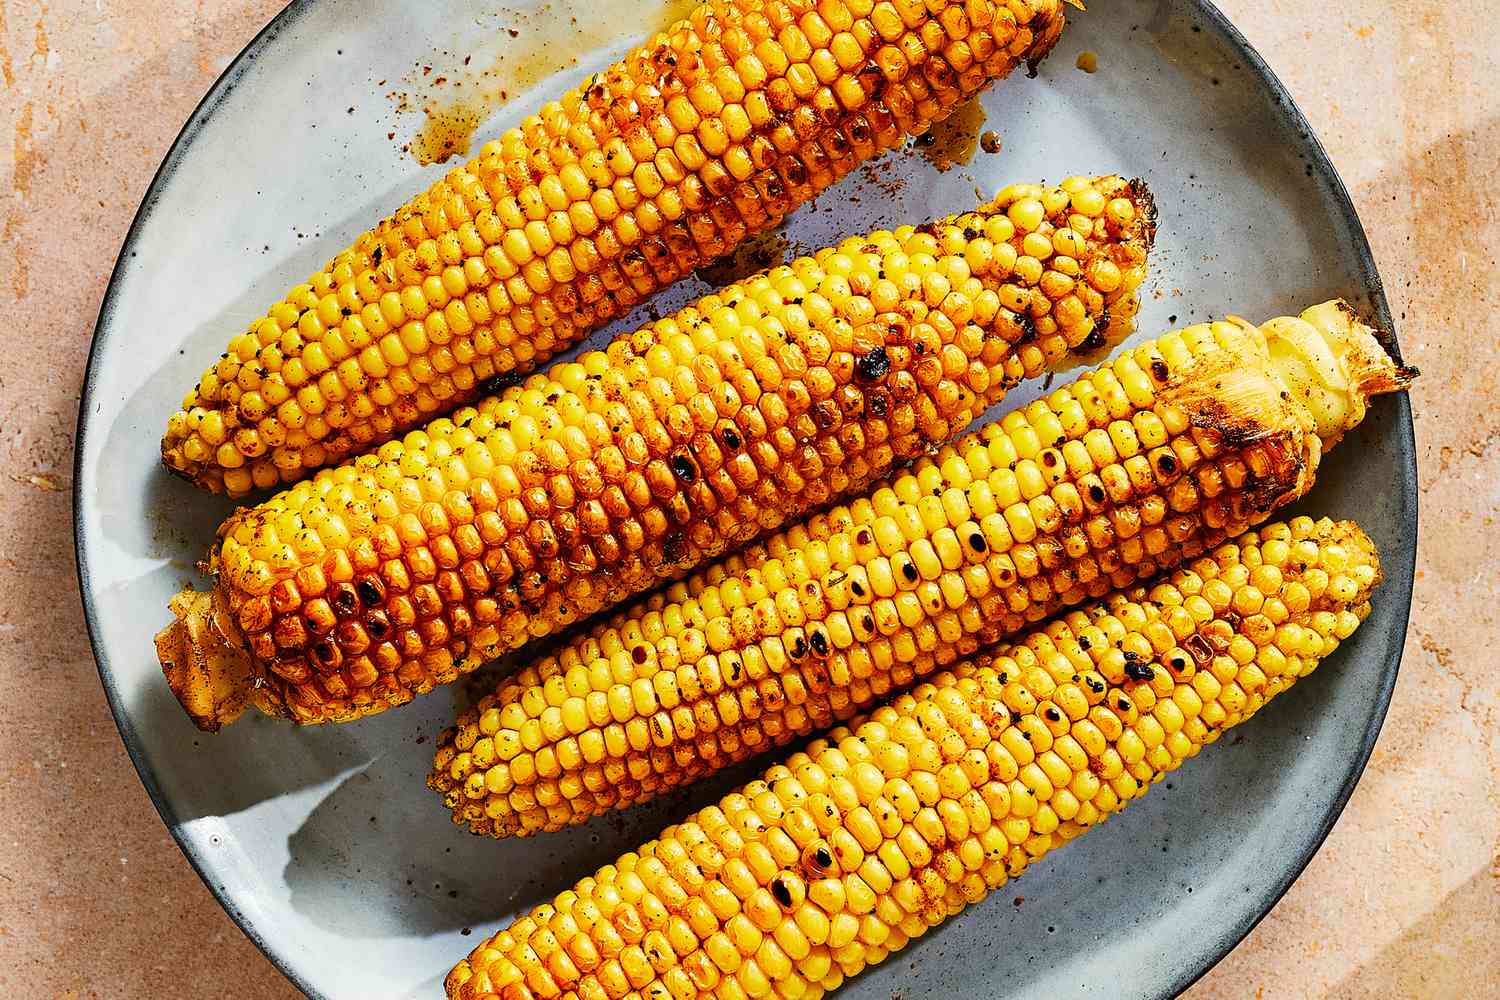 A platter of grilled cajun-style corn on the cob